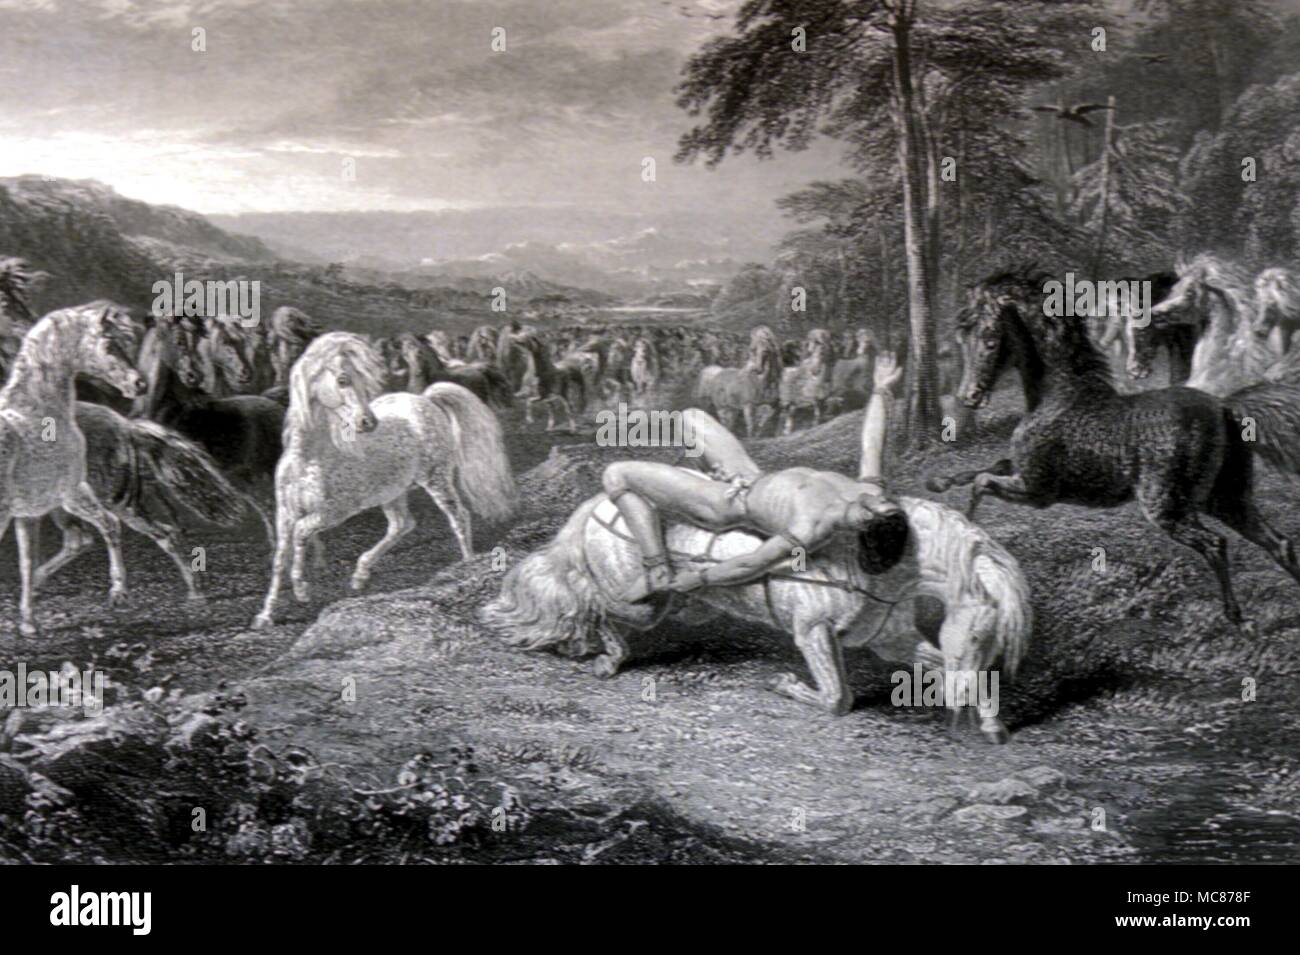 HISTORY The Polish nobleman, Mazeppa, bound naked on the back of a wild horse in the Ukraine. Mazeppa, thus punished for an affair, was rescued by peasants. Illustration to the poem by Byron (1819). Stock Photo